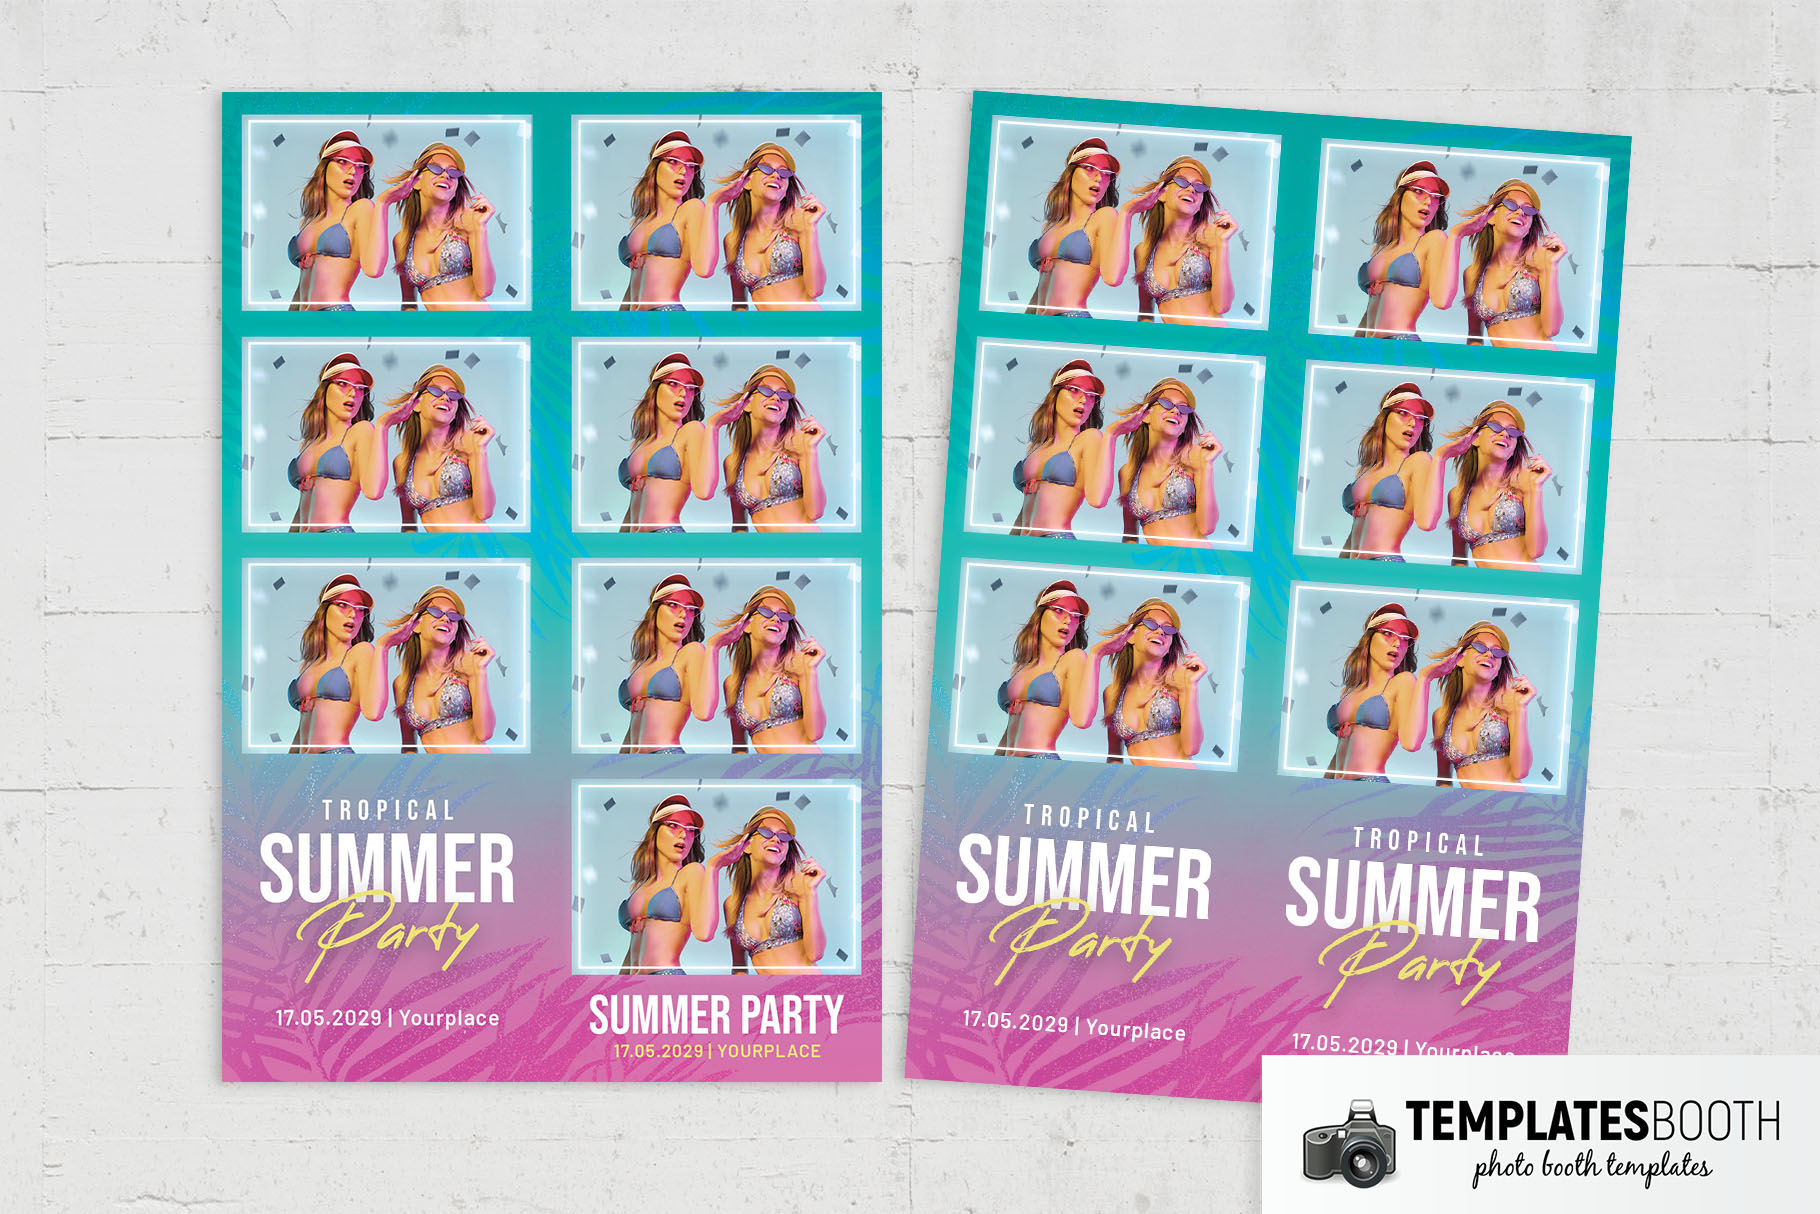 Tropical Summer Party Photo Booth Template